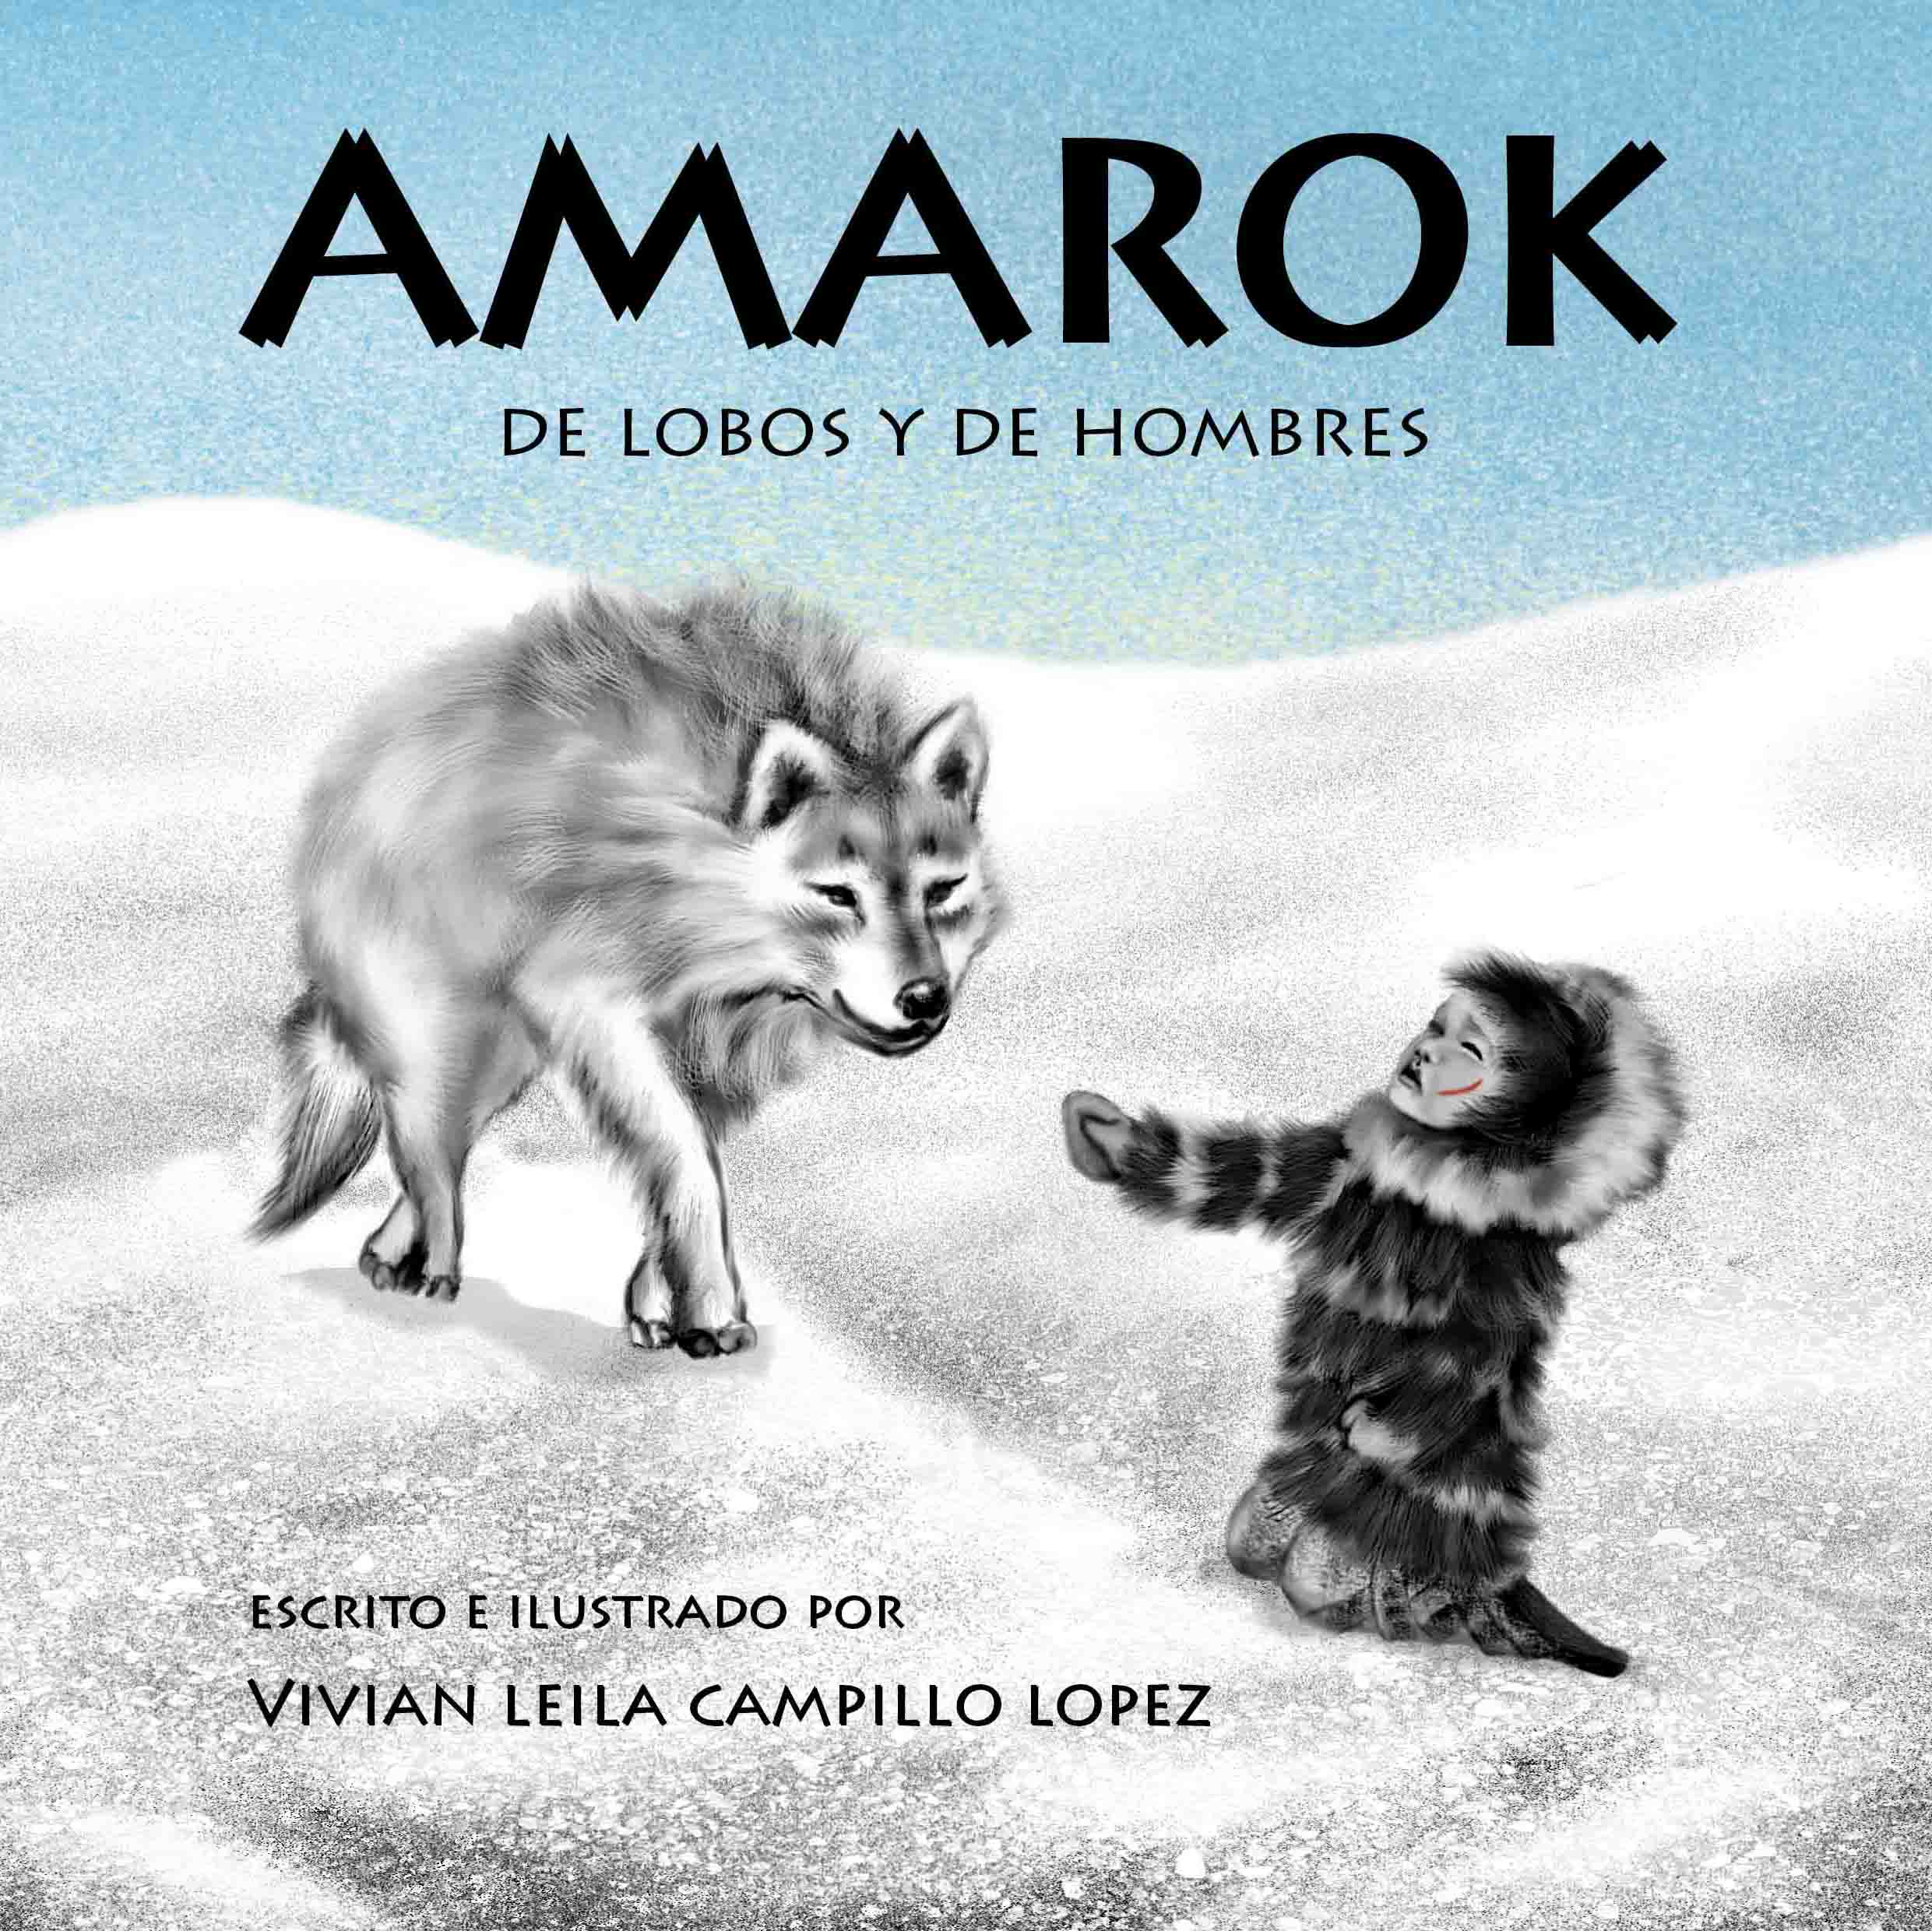 Amarok Illustrated Album by Vivian Leila Campillo page COVER